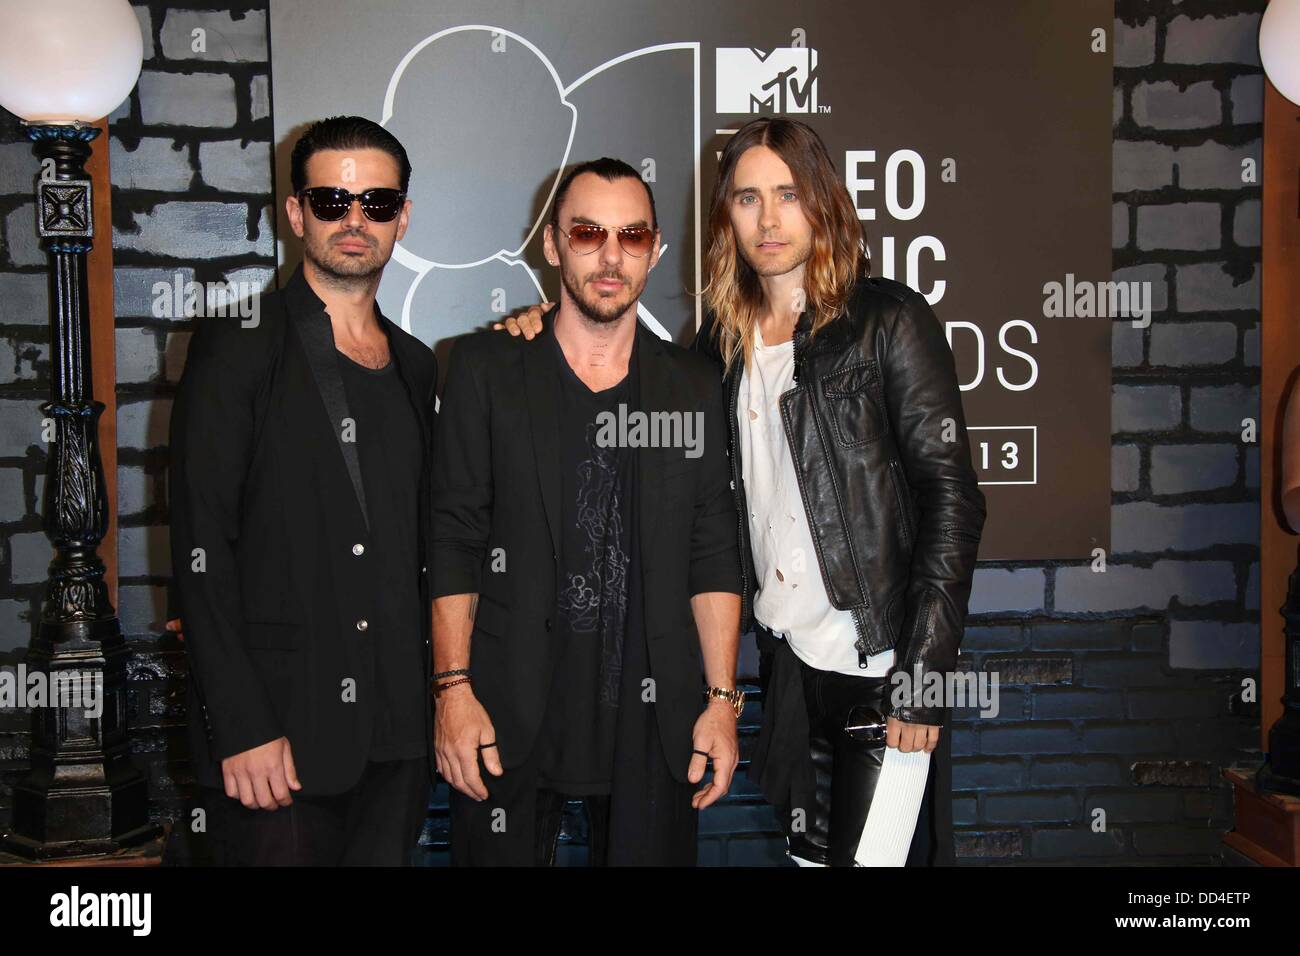 Brooklyn, New York, USA. 25th Aug, 2013. US musicians Tomislav Milicevic (l-R), Shannon Leto and Jared Leto, members of the band 30 Seconds to Mars arrive on the red carpet for the MTV Video Music Awards at the Barclays Center in Brooklyn, New York, USA, 25 August 2013. Photo: Hubert Boesl/dpa/Alamy Live News Stock Photo